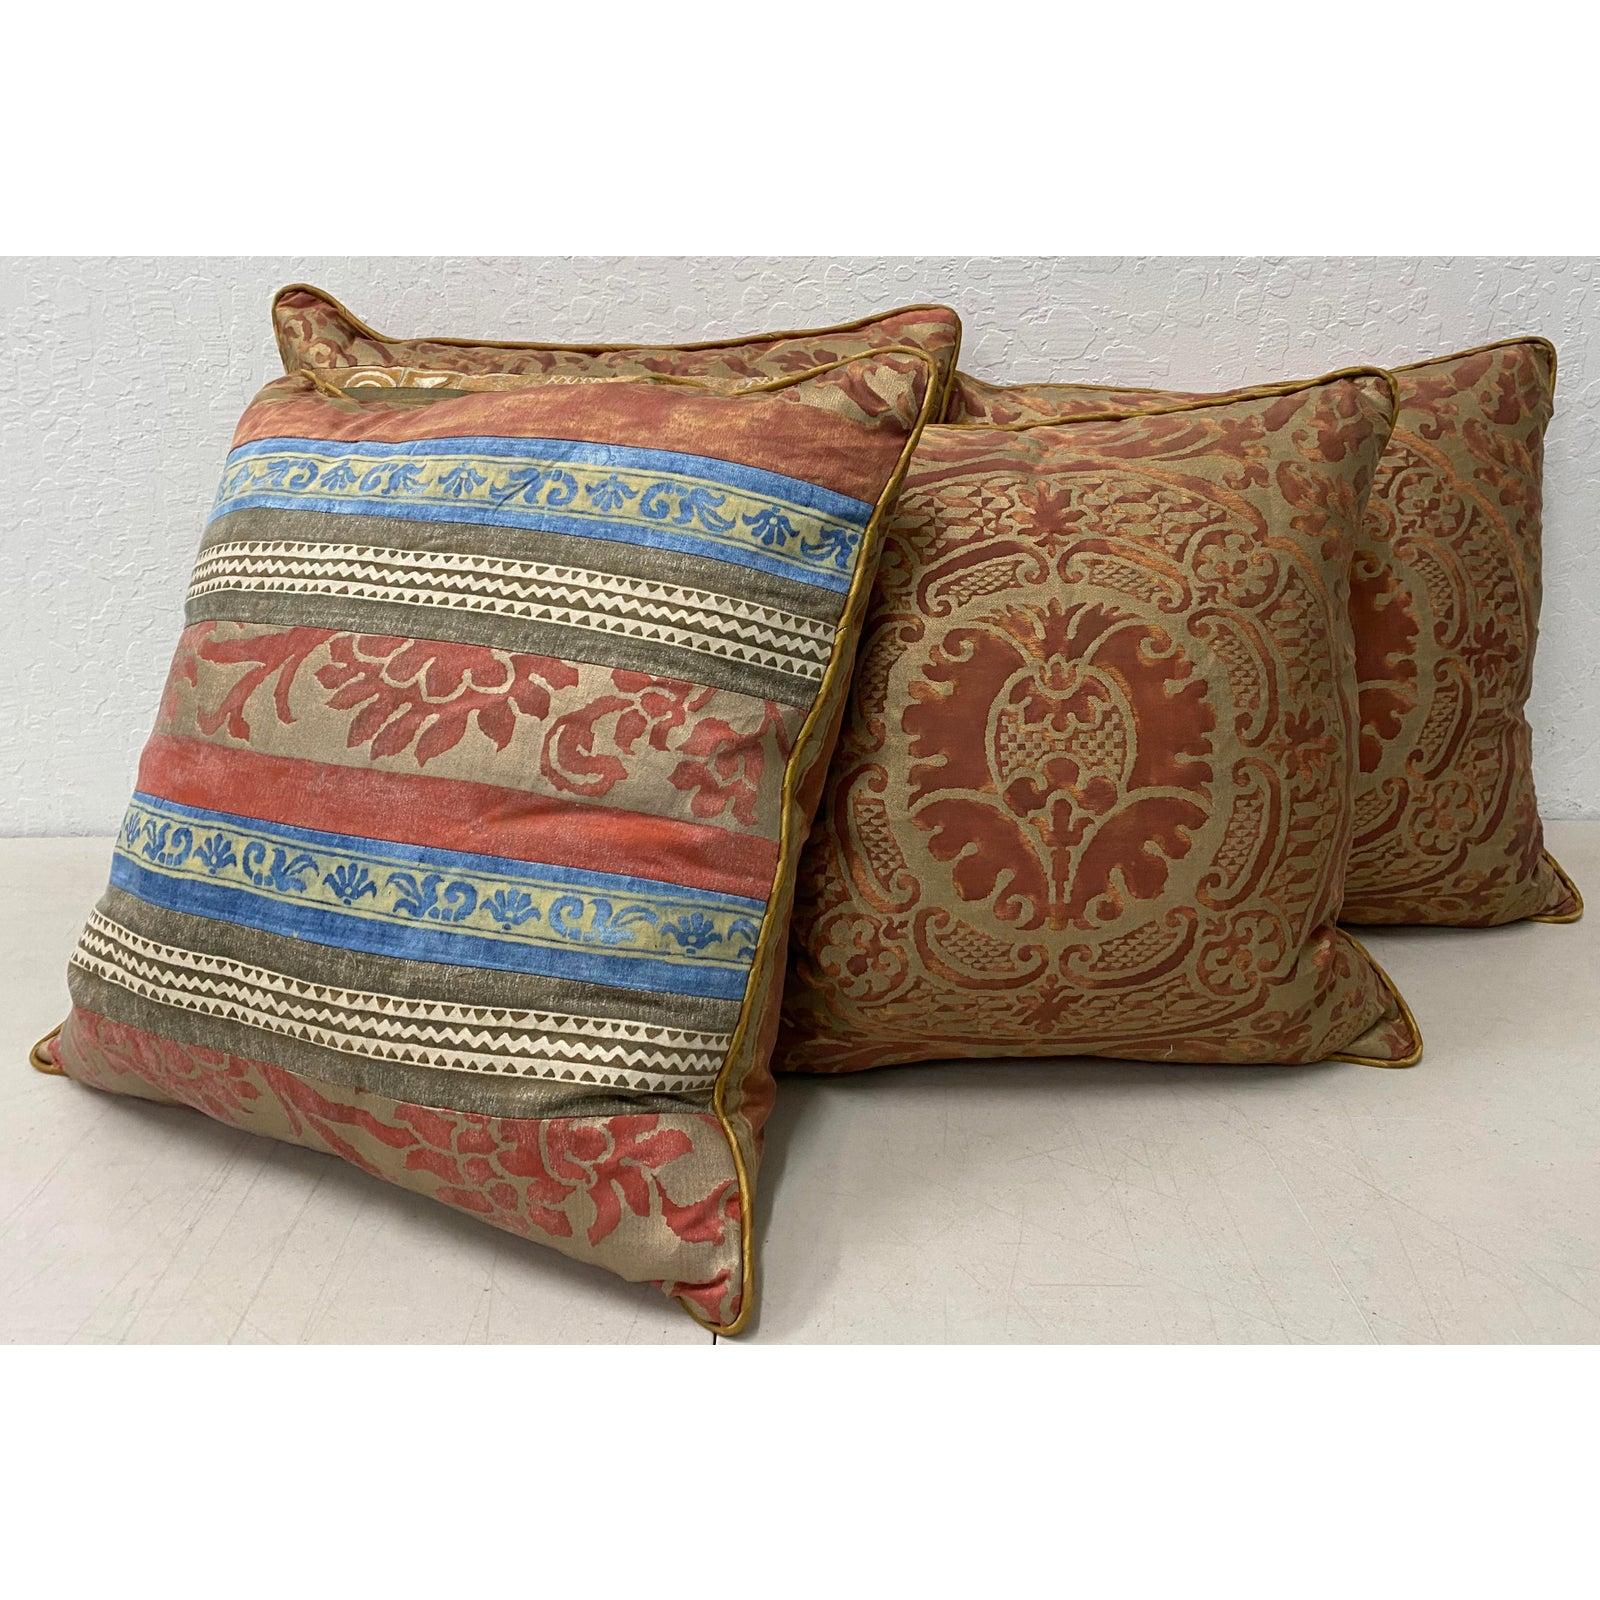 Set of four Fortuny fabric cushions / pillows

Four sumptuous designer cushions made with the finest Fortuny fabric.

Each cushion measures 19